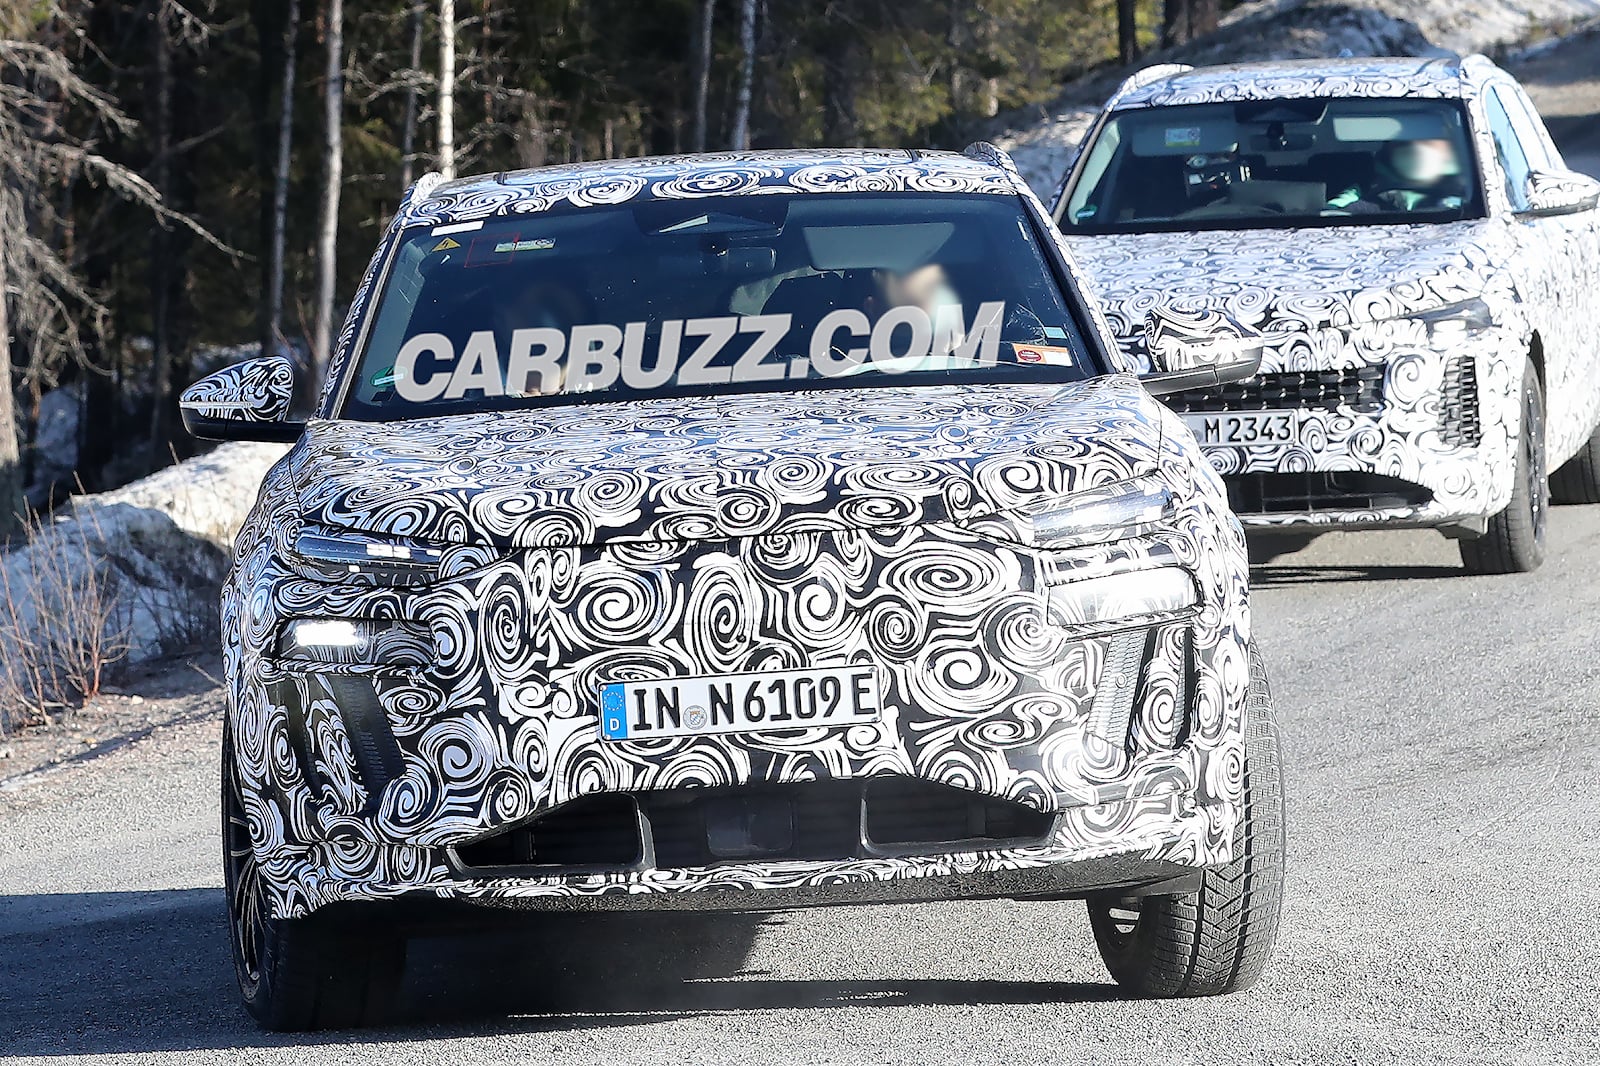 Spied: Audis New RS Q6 e-tron During Testing